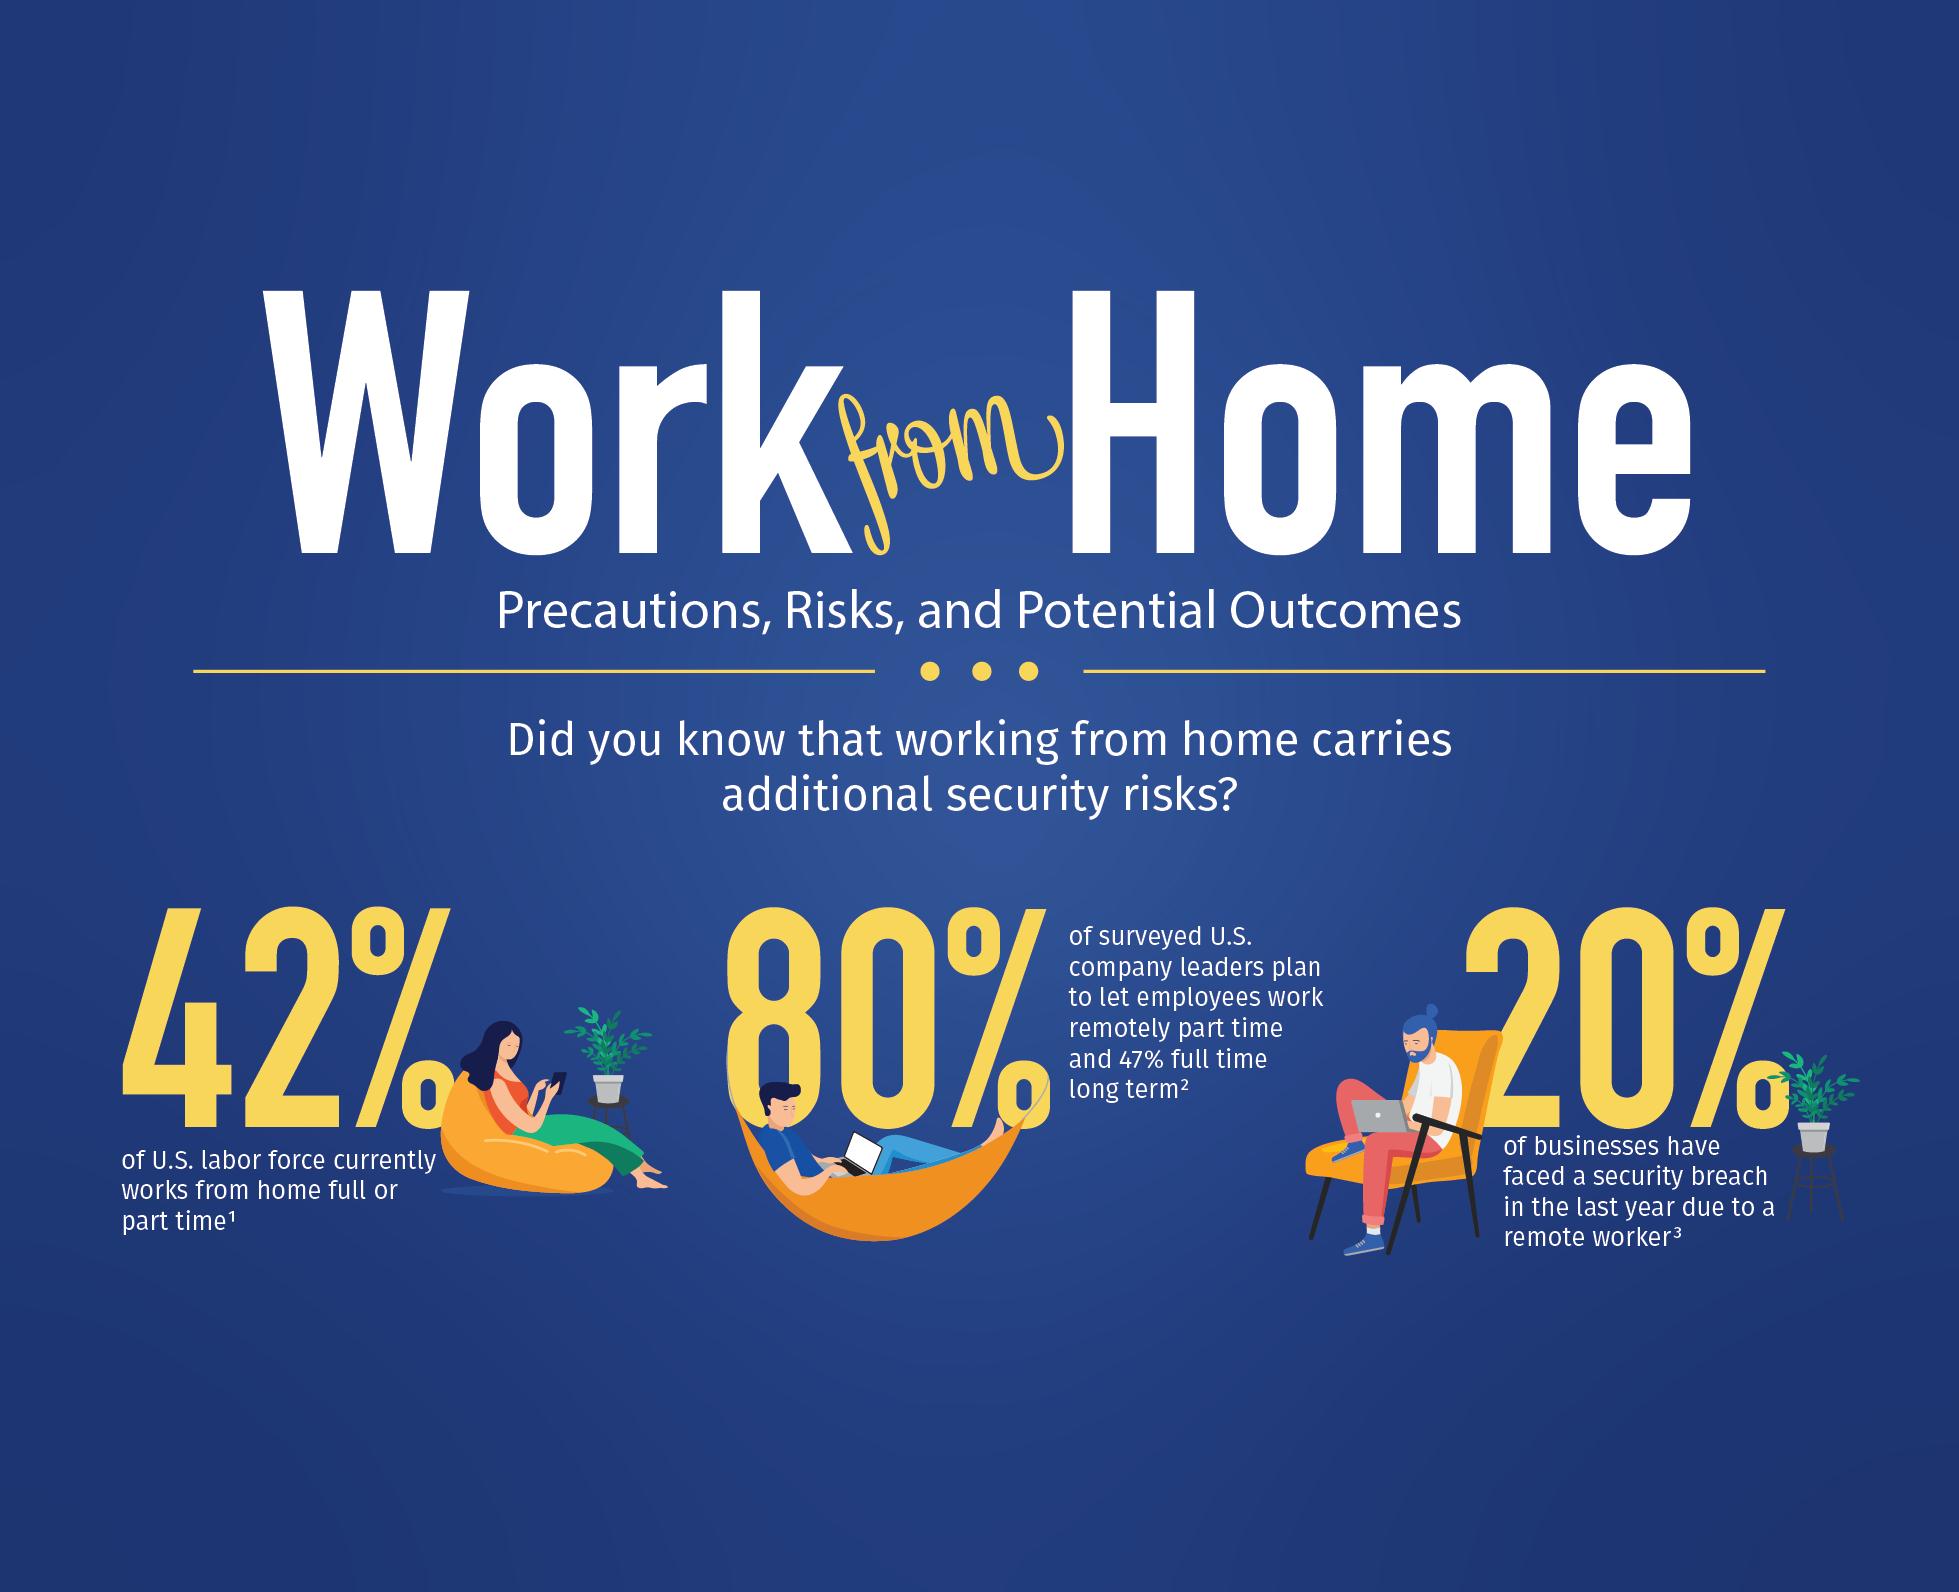 Infographic denoting WFH statistics from both
an employee and employer's perspective